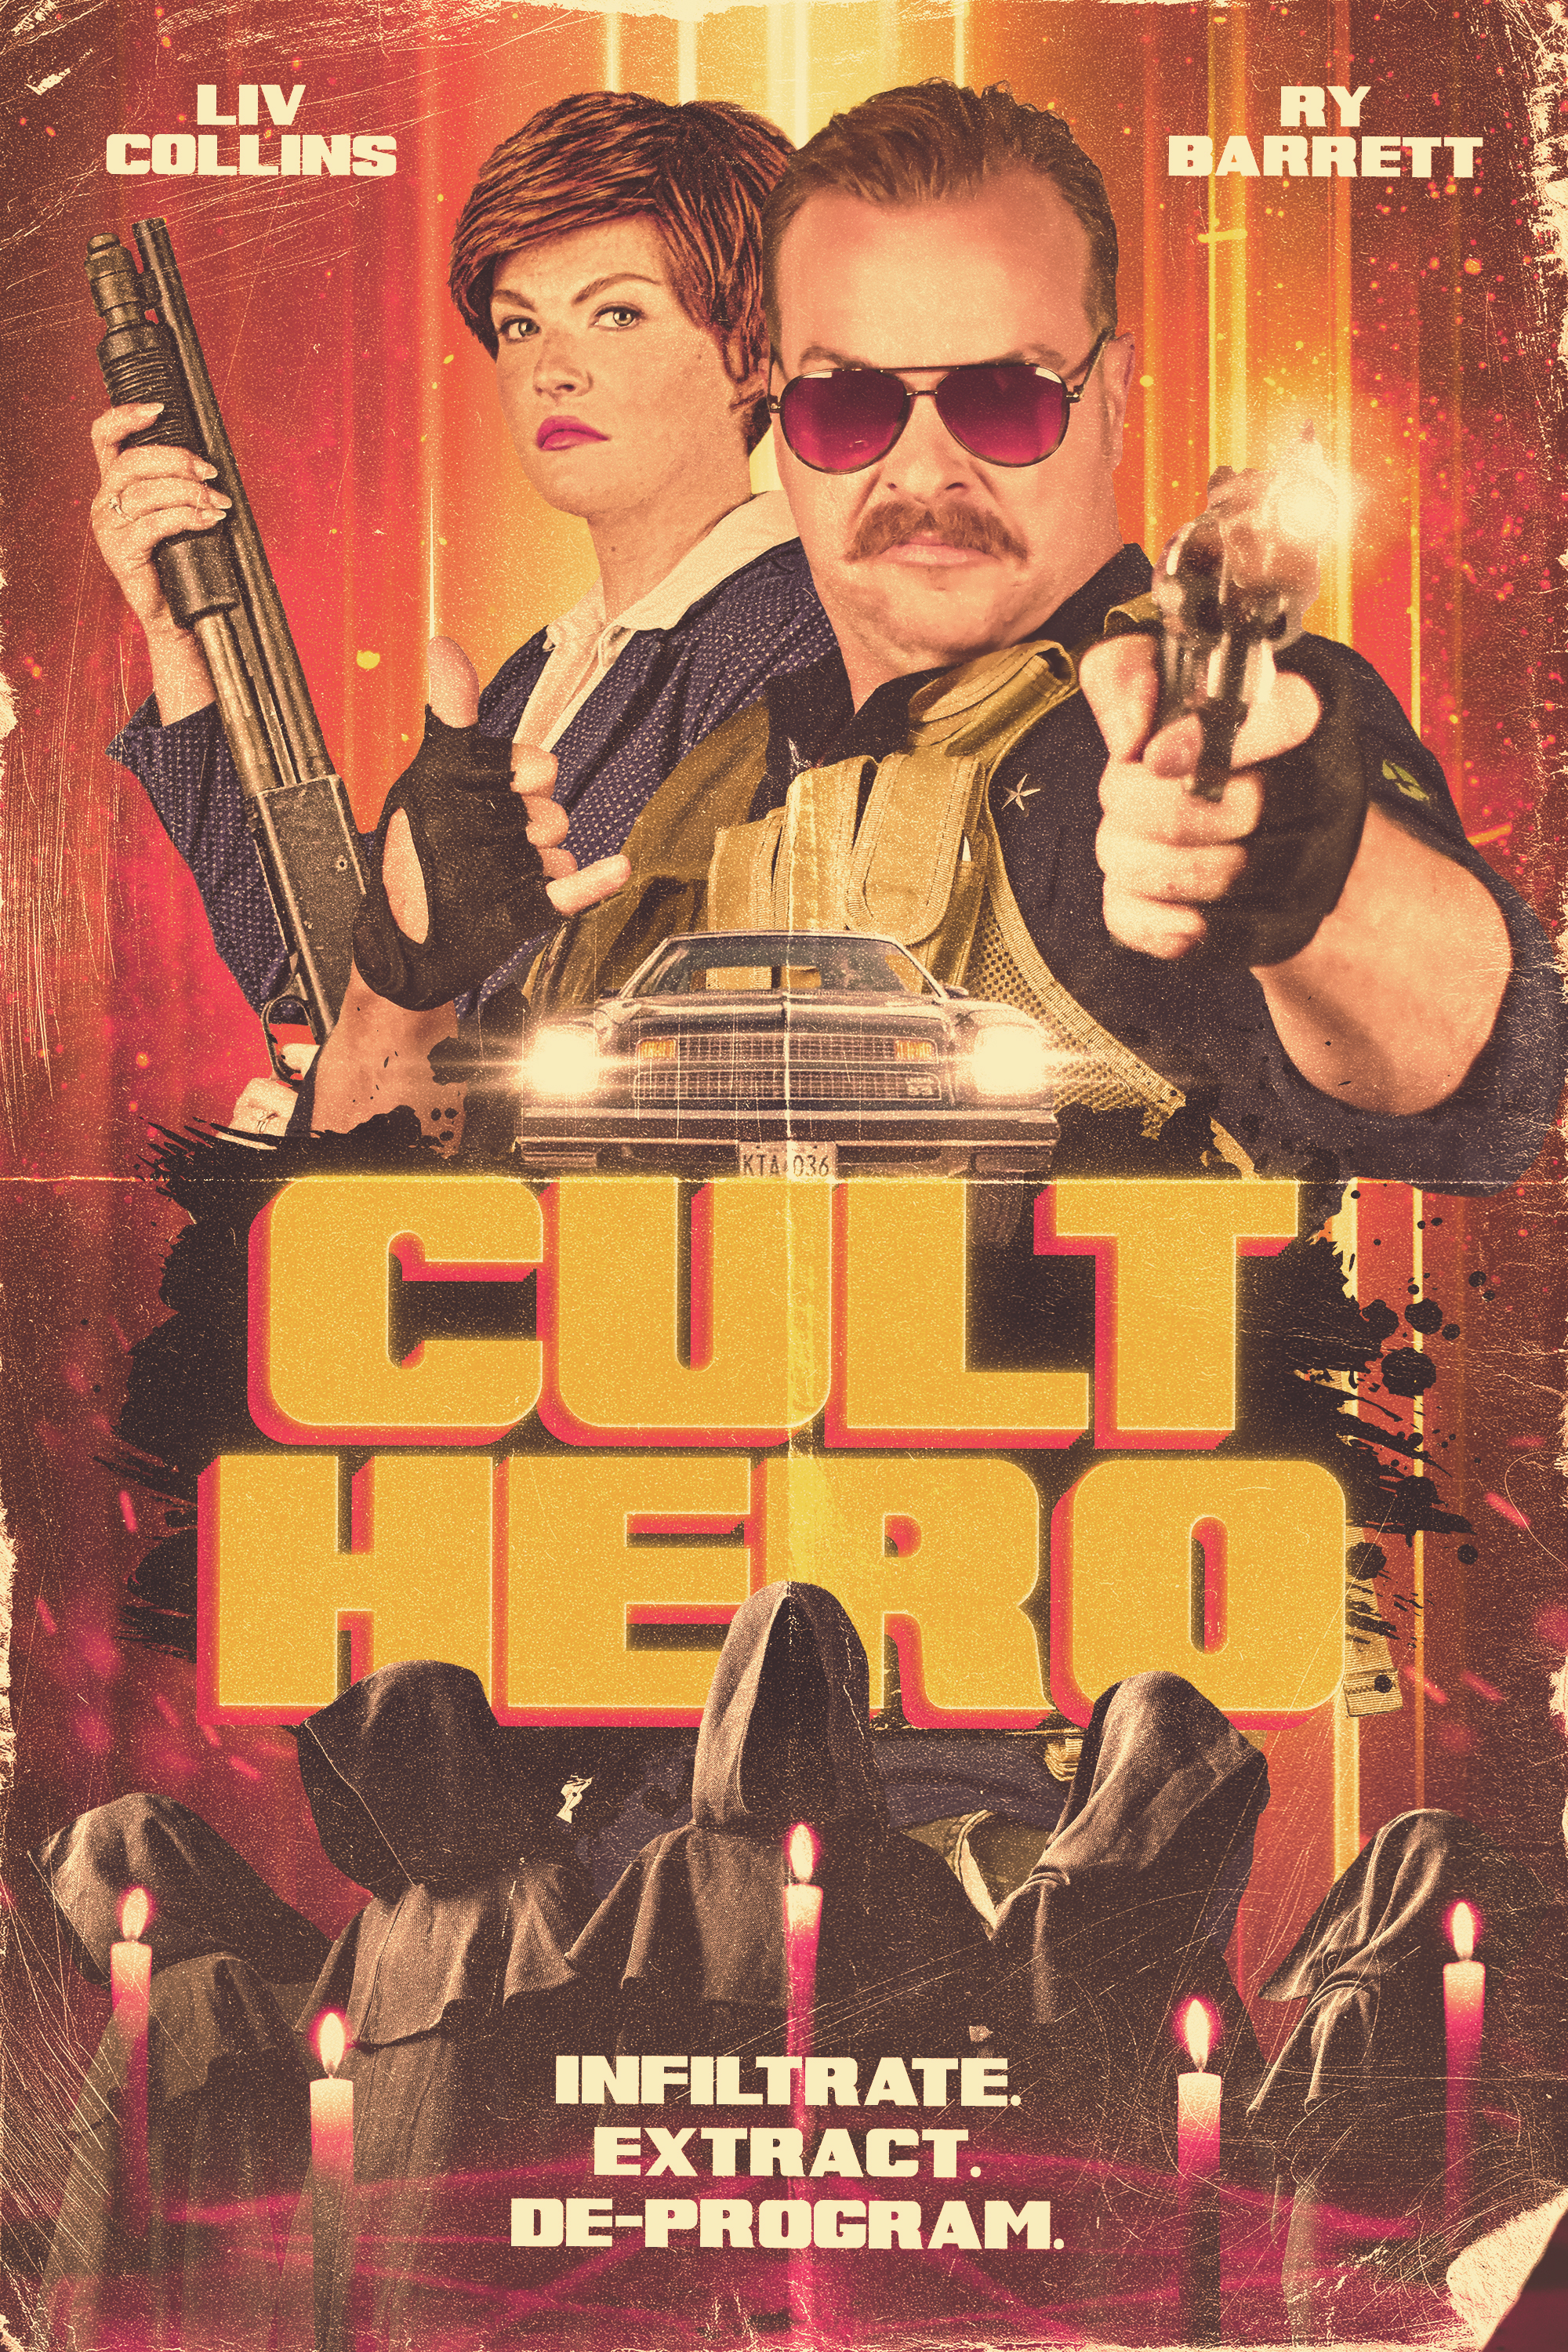 CULT HERO Exclusive: Trailer Premiere, New Poster and Raven Banner